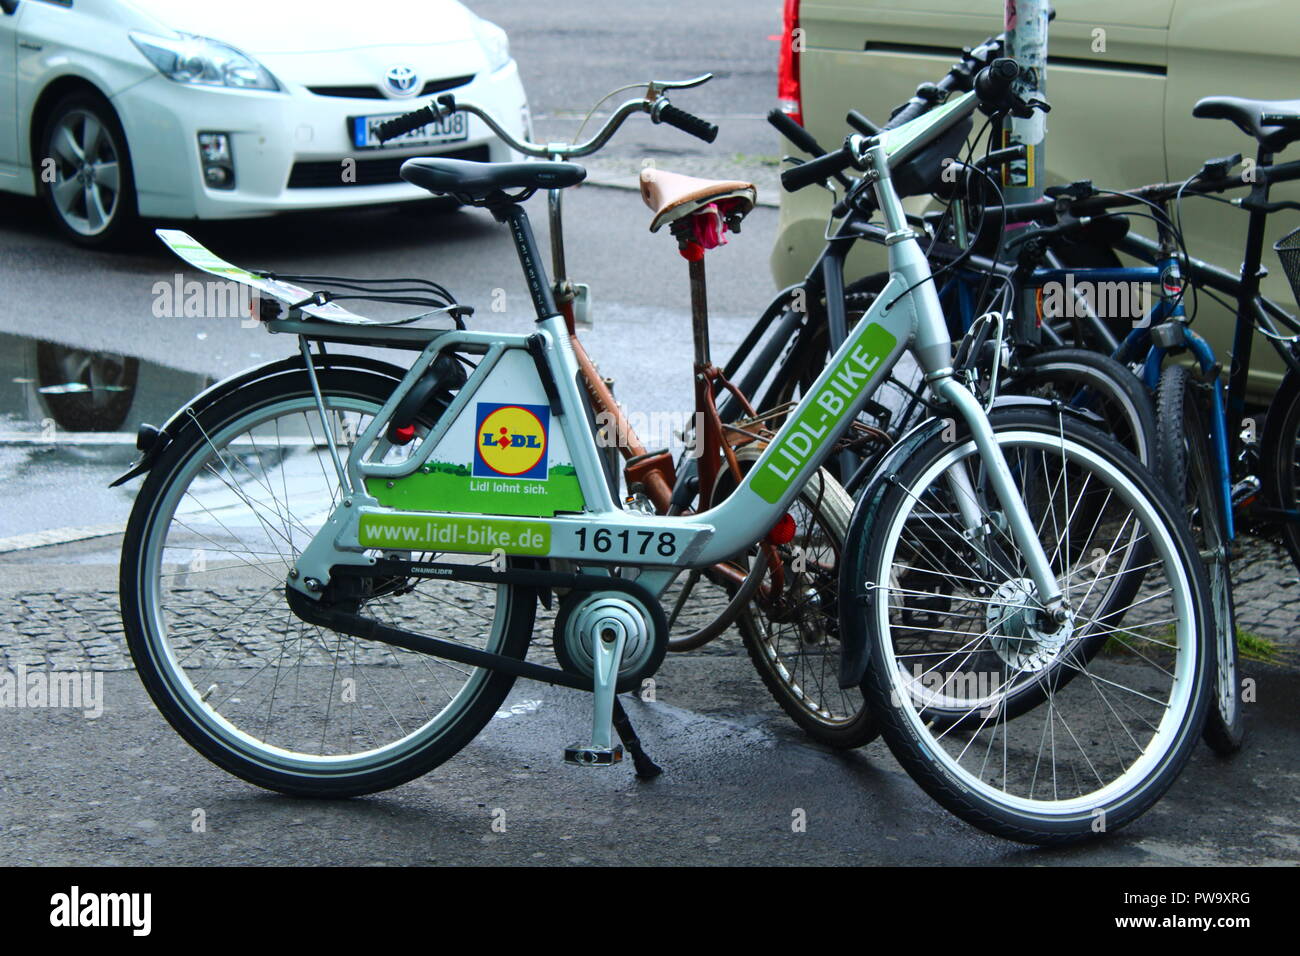 Lidl Bike - Berlin Bike Sharing Scheme - Public cycling - with other bikes  and car in background Stock Photo - Alamy